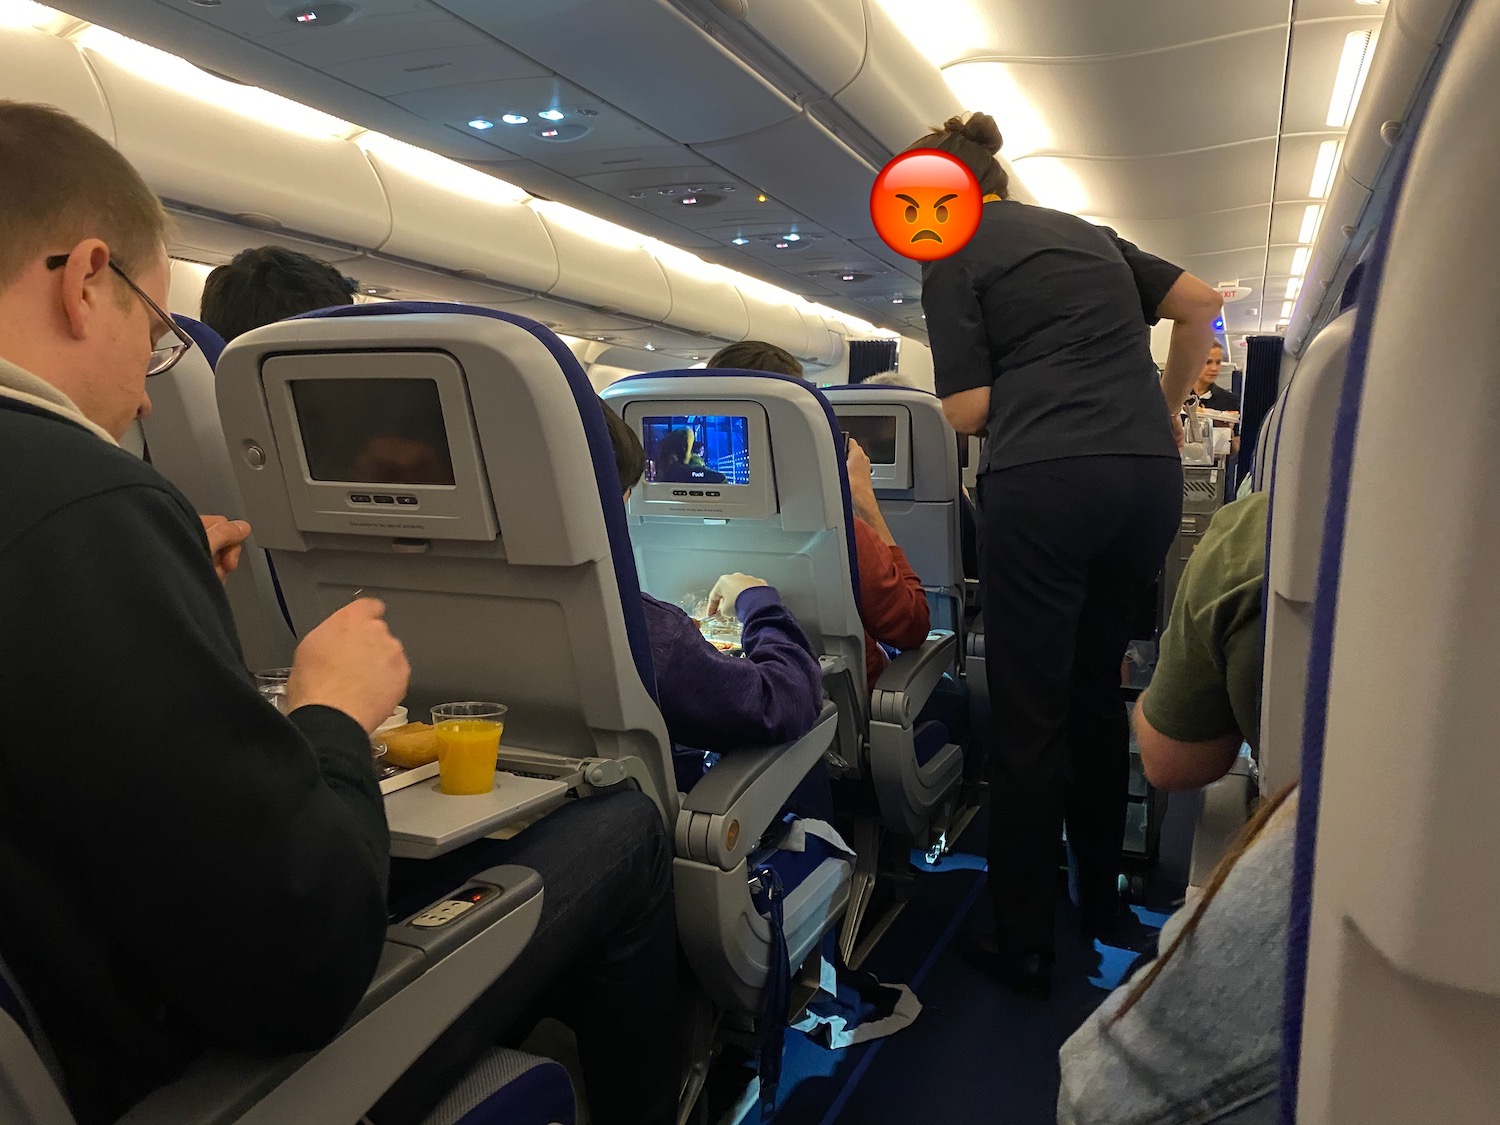 a person standing in a row of seats on an airplane